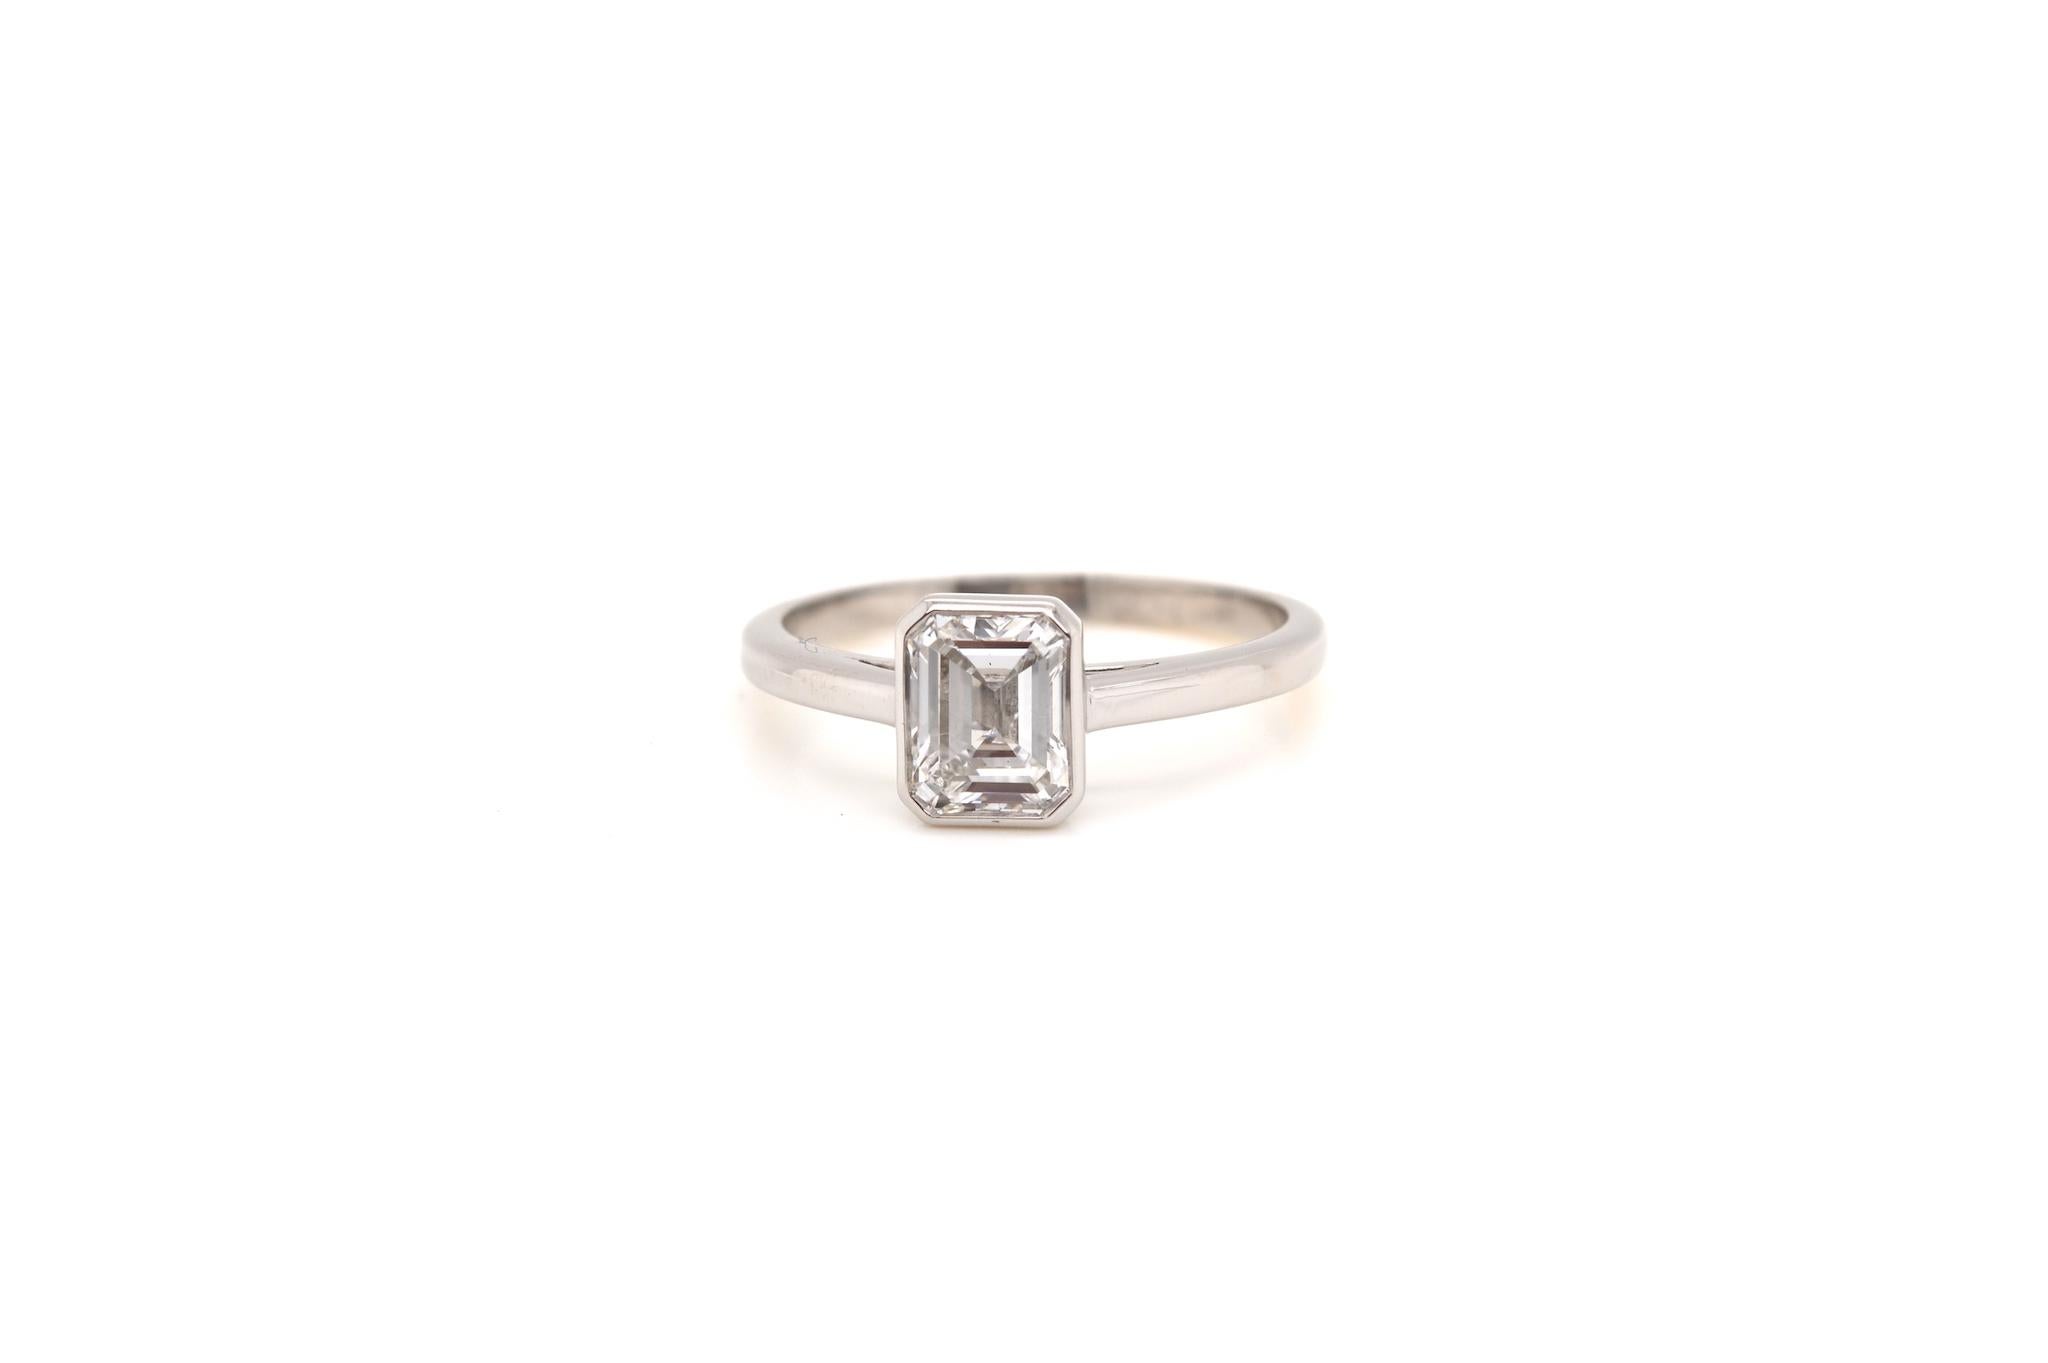 Stones: 1.03 carats F/Si1 emerald cut diamond
Material: Platinum and 18k gold
Dimensions: 6mm length on finger
Weight: 3.6g
Size: 52 (free sizing)
-Laboratory certificate
Certificate
Ref. : 24407 - 24341